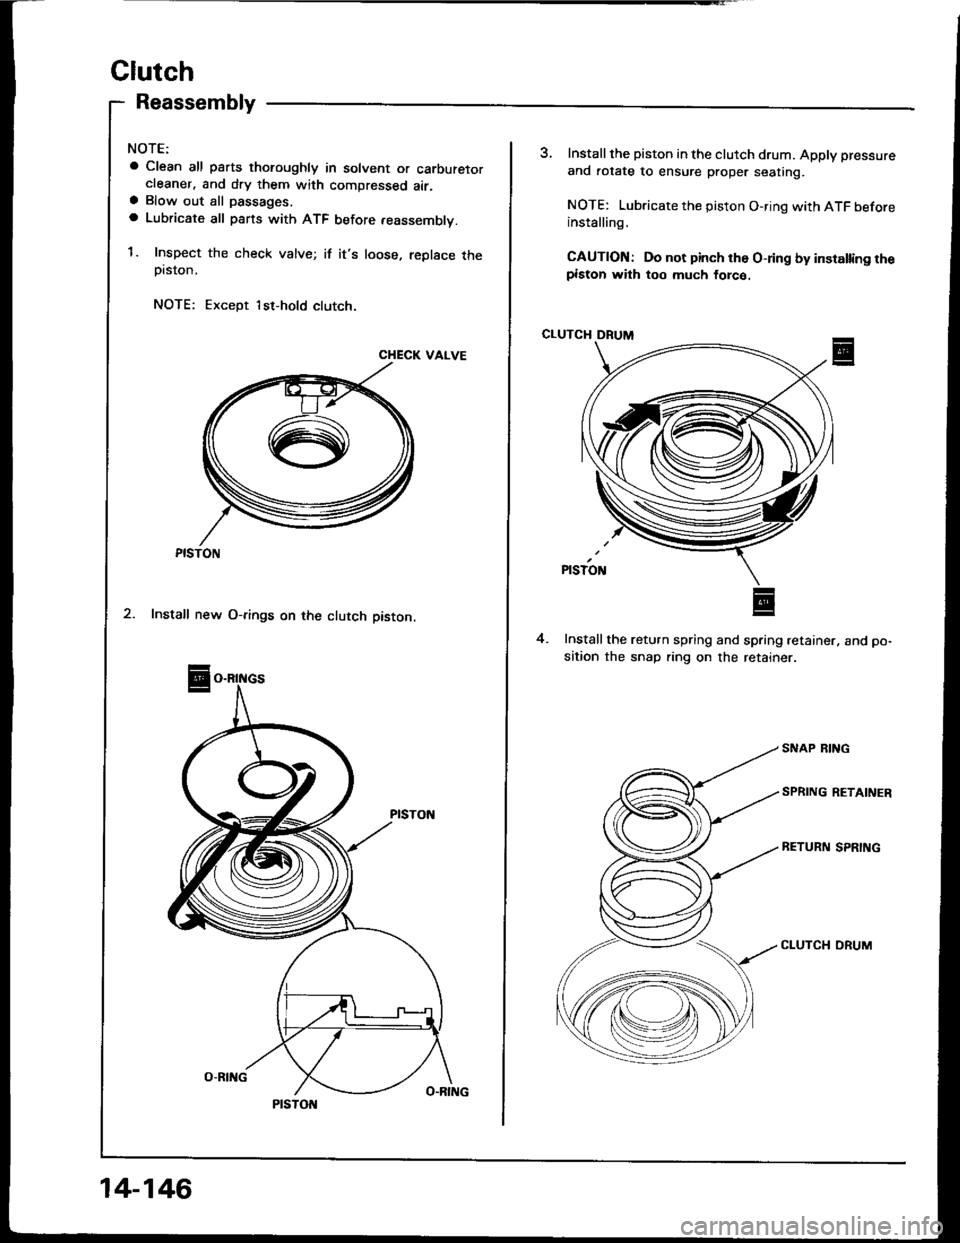 ACURA INTEGRA 1994  Service Owners Manual Clutch
Reassembly
NOTE:
a Clean all psrts thoroughly in solvent or carburetorcleaner. and dry them with compressed air.a Blow out all passages.
a Lubricate all pans with ATF before .eassembly.
1. Insp